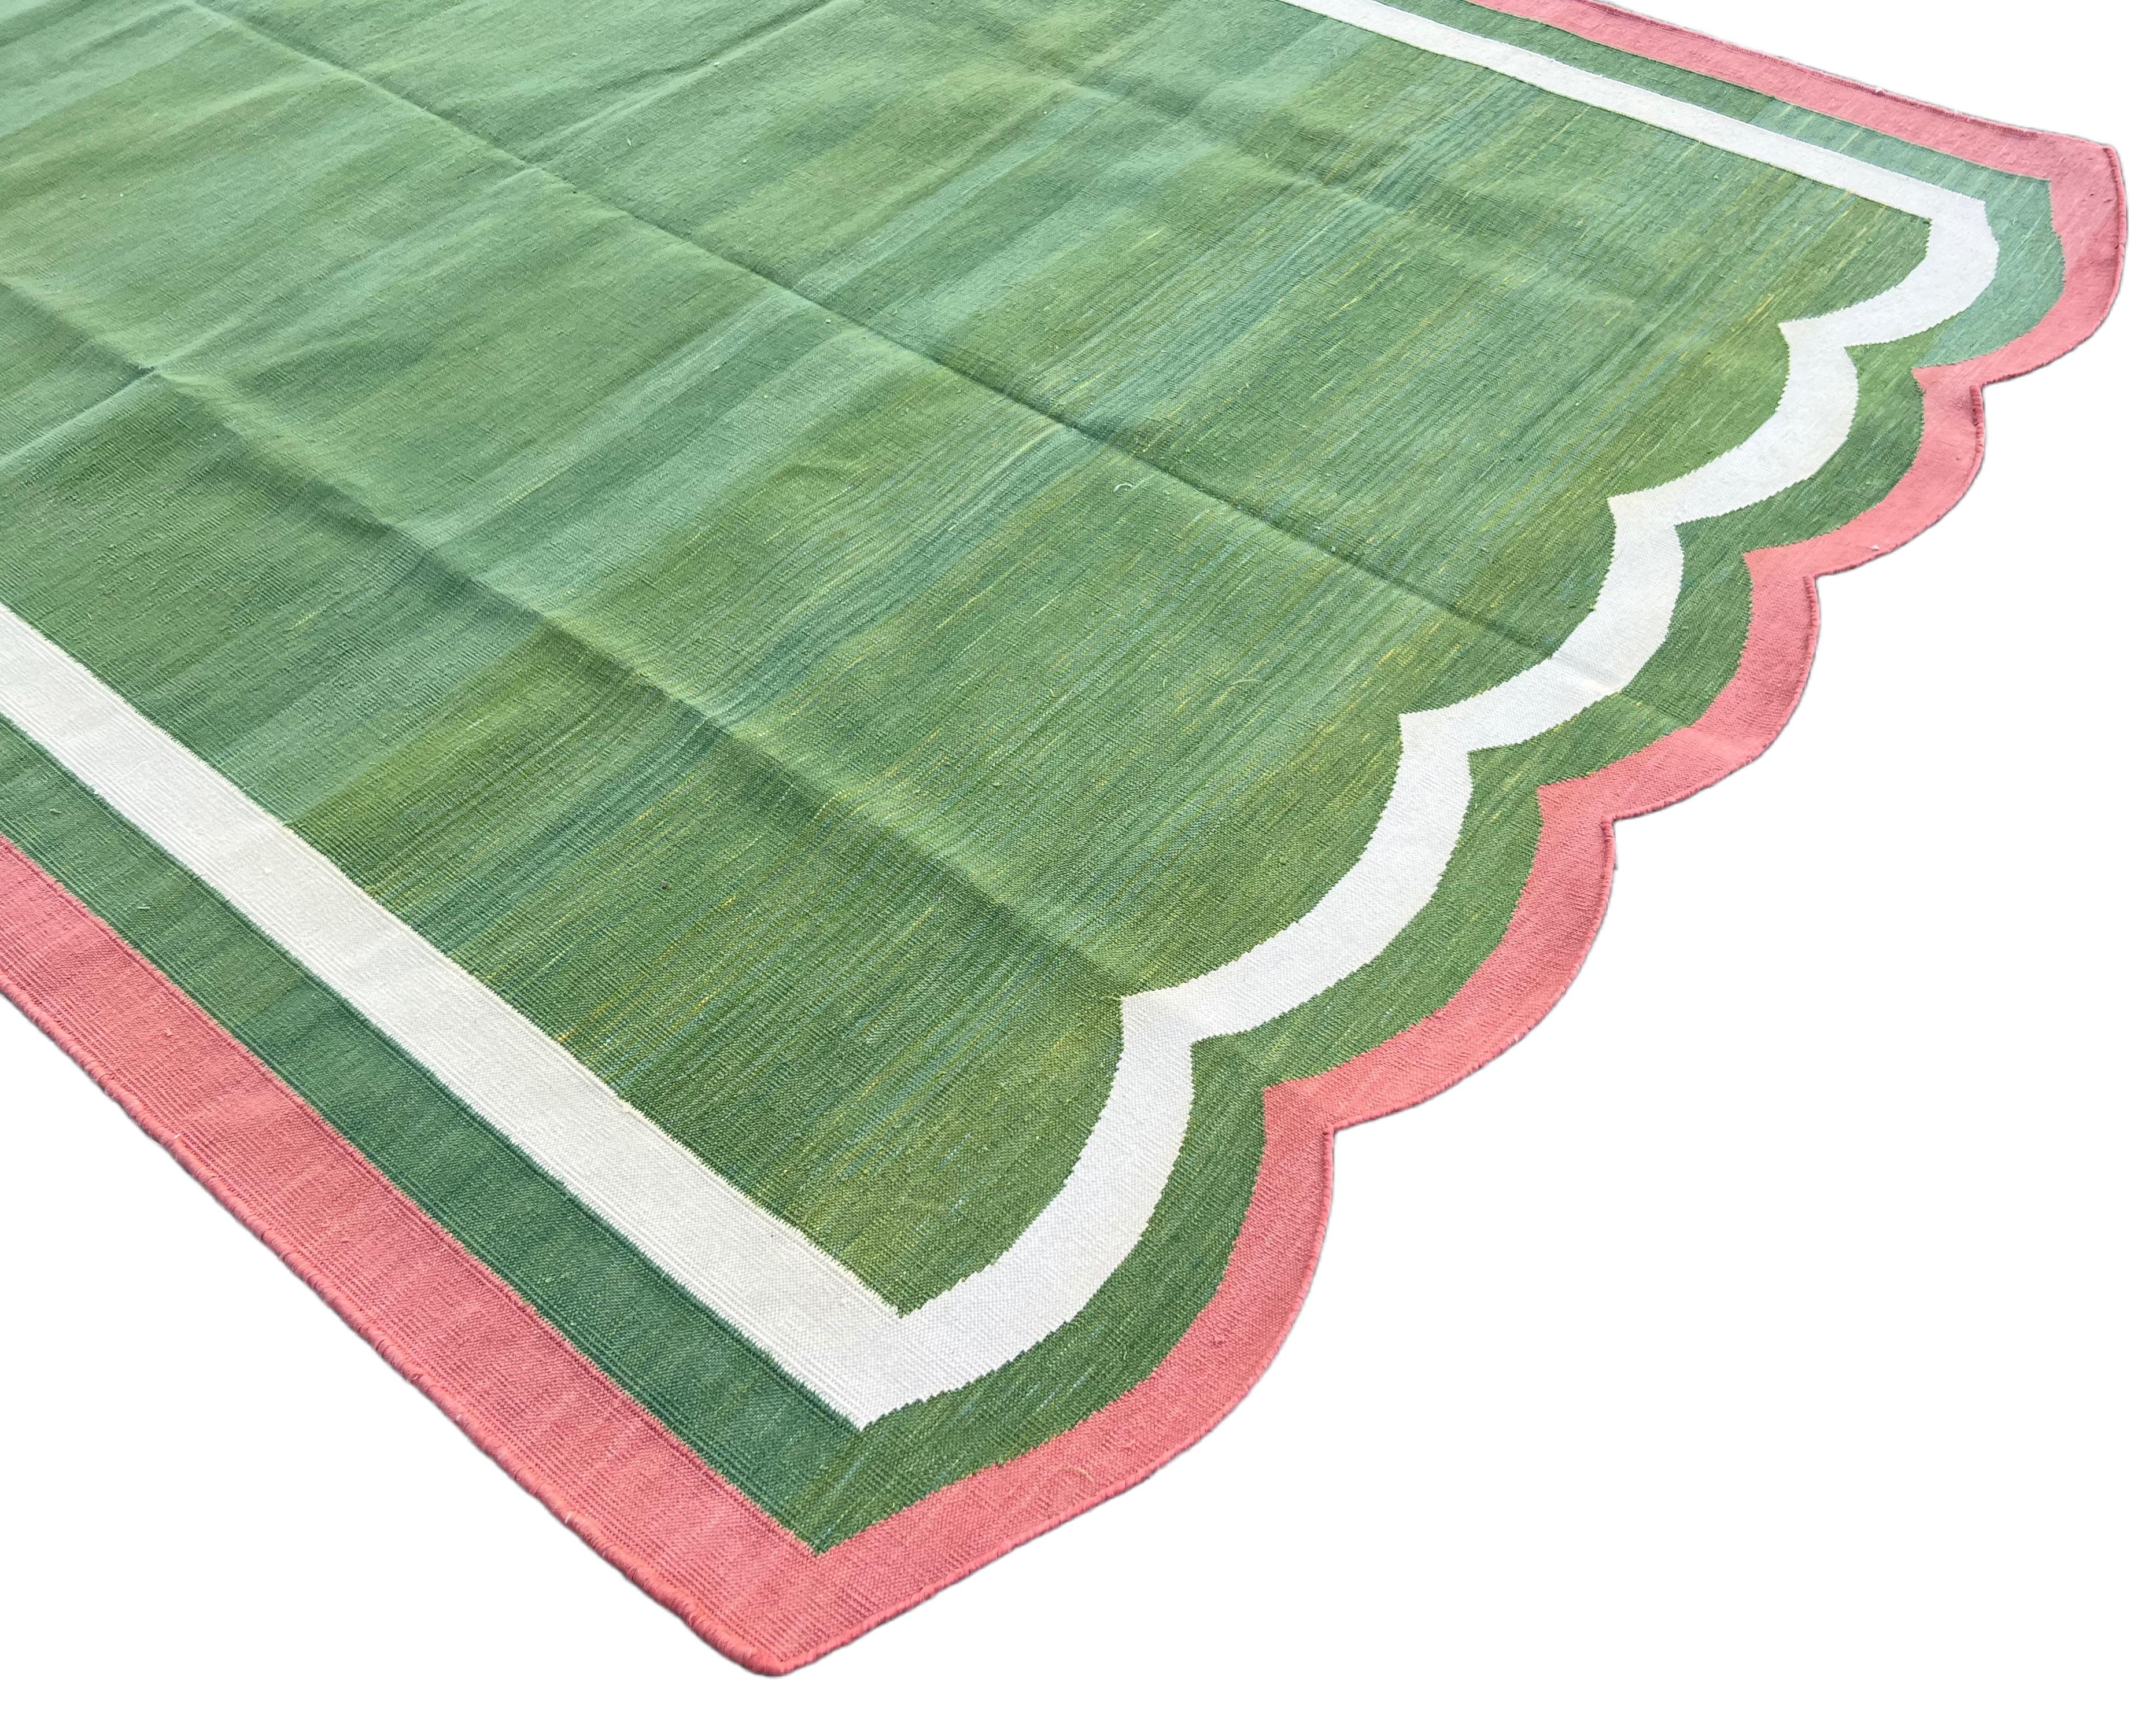 Indian Handmade Cotton Area Flat Weave Rug, 5x8 Green And Pink Scalloped Kilim Dhurrie For Sale